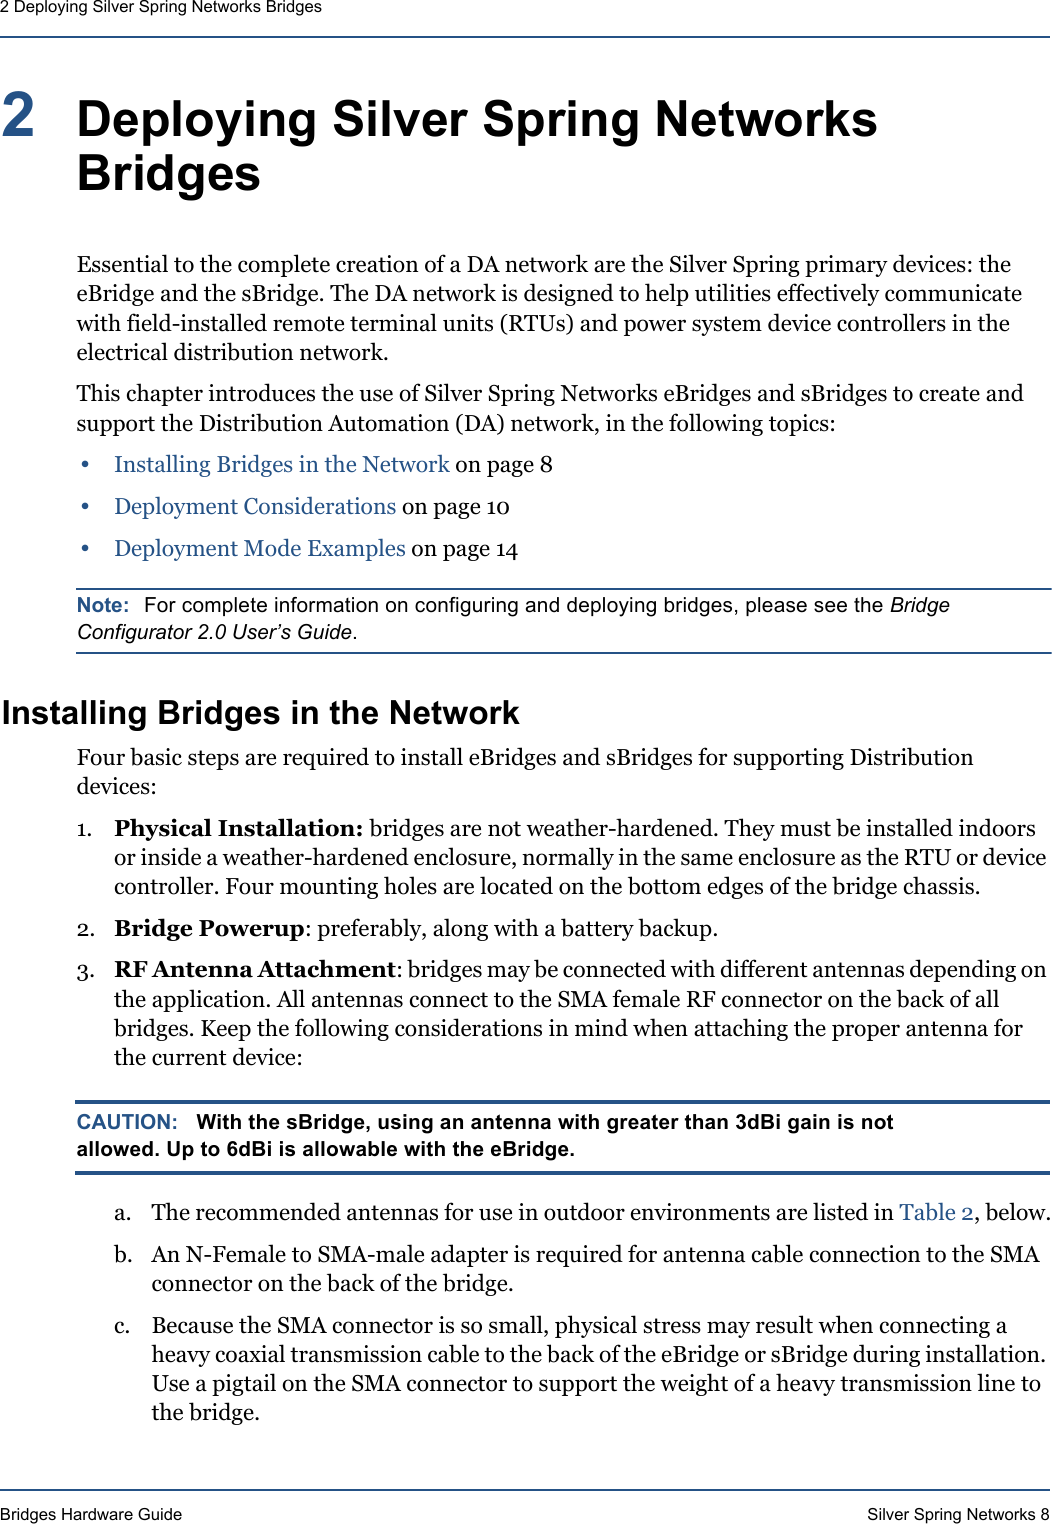 Bridges Hardware Guide Silver Spring Networks 82 Deploying Silver Spring Networks Bridges2Deploying Silver Spring Networks BridgesEssential to the complete creation of a DA network are the Silver Spring primary devices: the eBridge and the sBridge. The DA network is designed to help utilities effectively communicate with field-installed remote terminal units (RTUs) and power system device controllers in the electrical distribution network.This chapter introduces the use of Silver Spring Networks eBridges and sBridges to create and support the Distribution Automation (DA) network, in the following topics:•Installing Bridges in the Network on page 8•Deployment Considerations on page 10•Deployment Mode Examples on page 14Note: For complete information on configuring and deploying bridges, please see the Bridge Configurator 2.0 User’s Guide.Installing Bridges in the NetworkFour basic steps are required to install eBridges and sBridges for supporting Distribution devices:1. Physical Installation: bridges are not weather-hardened. They must be installed indoors or inside a weather-hardened enclosure, normally in the same enclosure as the RTU or device controller. Four mounting holes are located on the bottom edges of the bridge chassis.2. Bridge Powerup: preferably, along with a battery backup. 3. RF Antenna Attachment: bridges may be connected with different antennas depending on the application. All antennas connect to the SMA female RF connector on the back of all bridges. Keep the following considerations in mind when attaching the proper antenna for the current device:CAUTION: With the sBridge, using an antenna with greater than 3dBi gain is not allowed. Up to 6dBi is allowable with the eBridge.a. The recommended antennas for use in outdoor environments are listed in Table 2, below.b. An N-Female to SMA-male adapter is required for antenna cable connection to the SMA connector on the back of the bridge.c. Because the SMA connector is so small, physical stress may result when connecting a heavy coaxial transmission cable to the back of the eBridge or sBridge during installation. Use a pigtail on the SMA connector to support the weight of a heavy transmission line to the bridge.